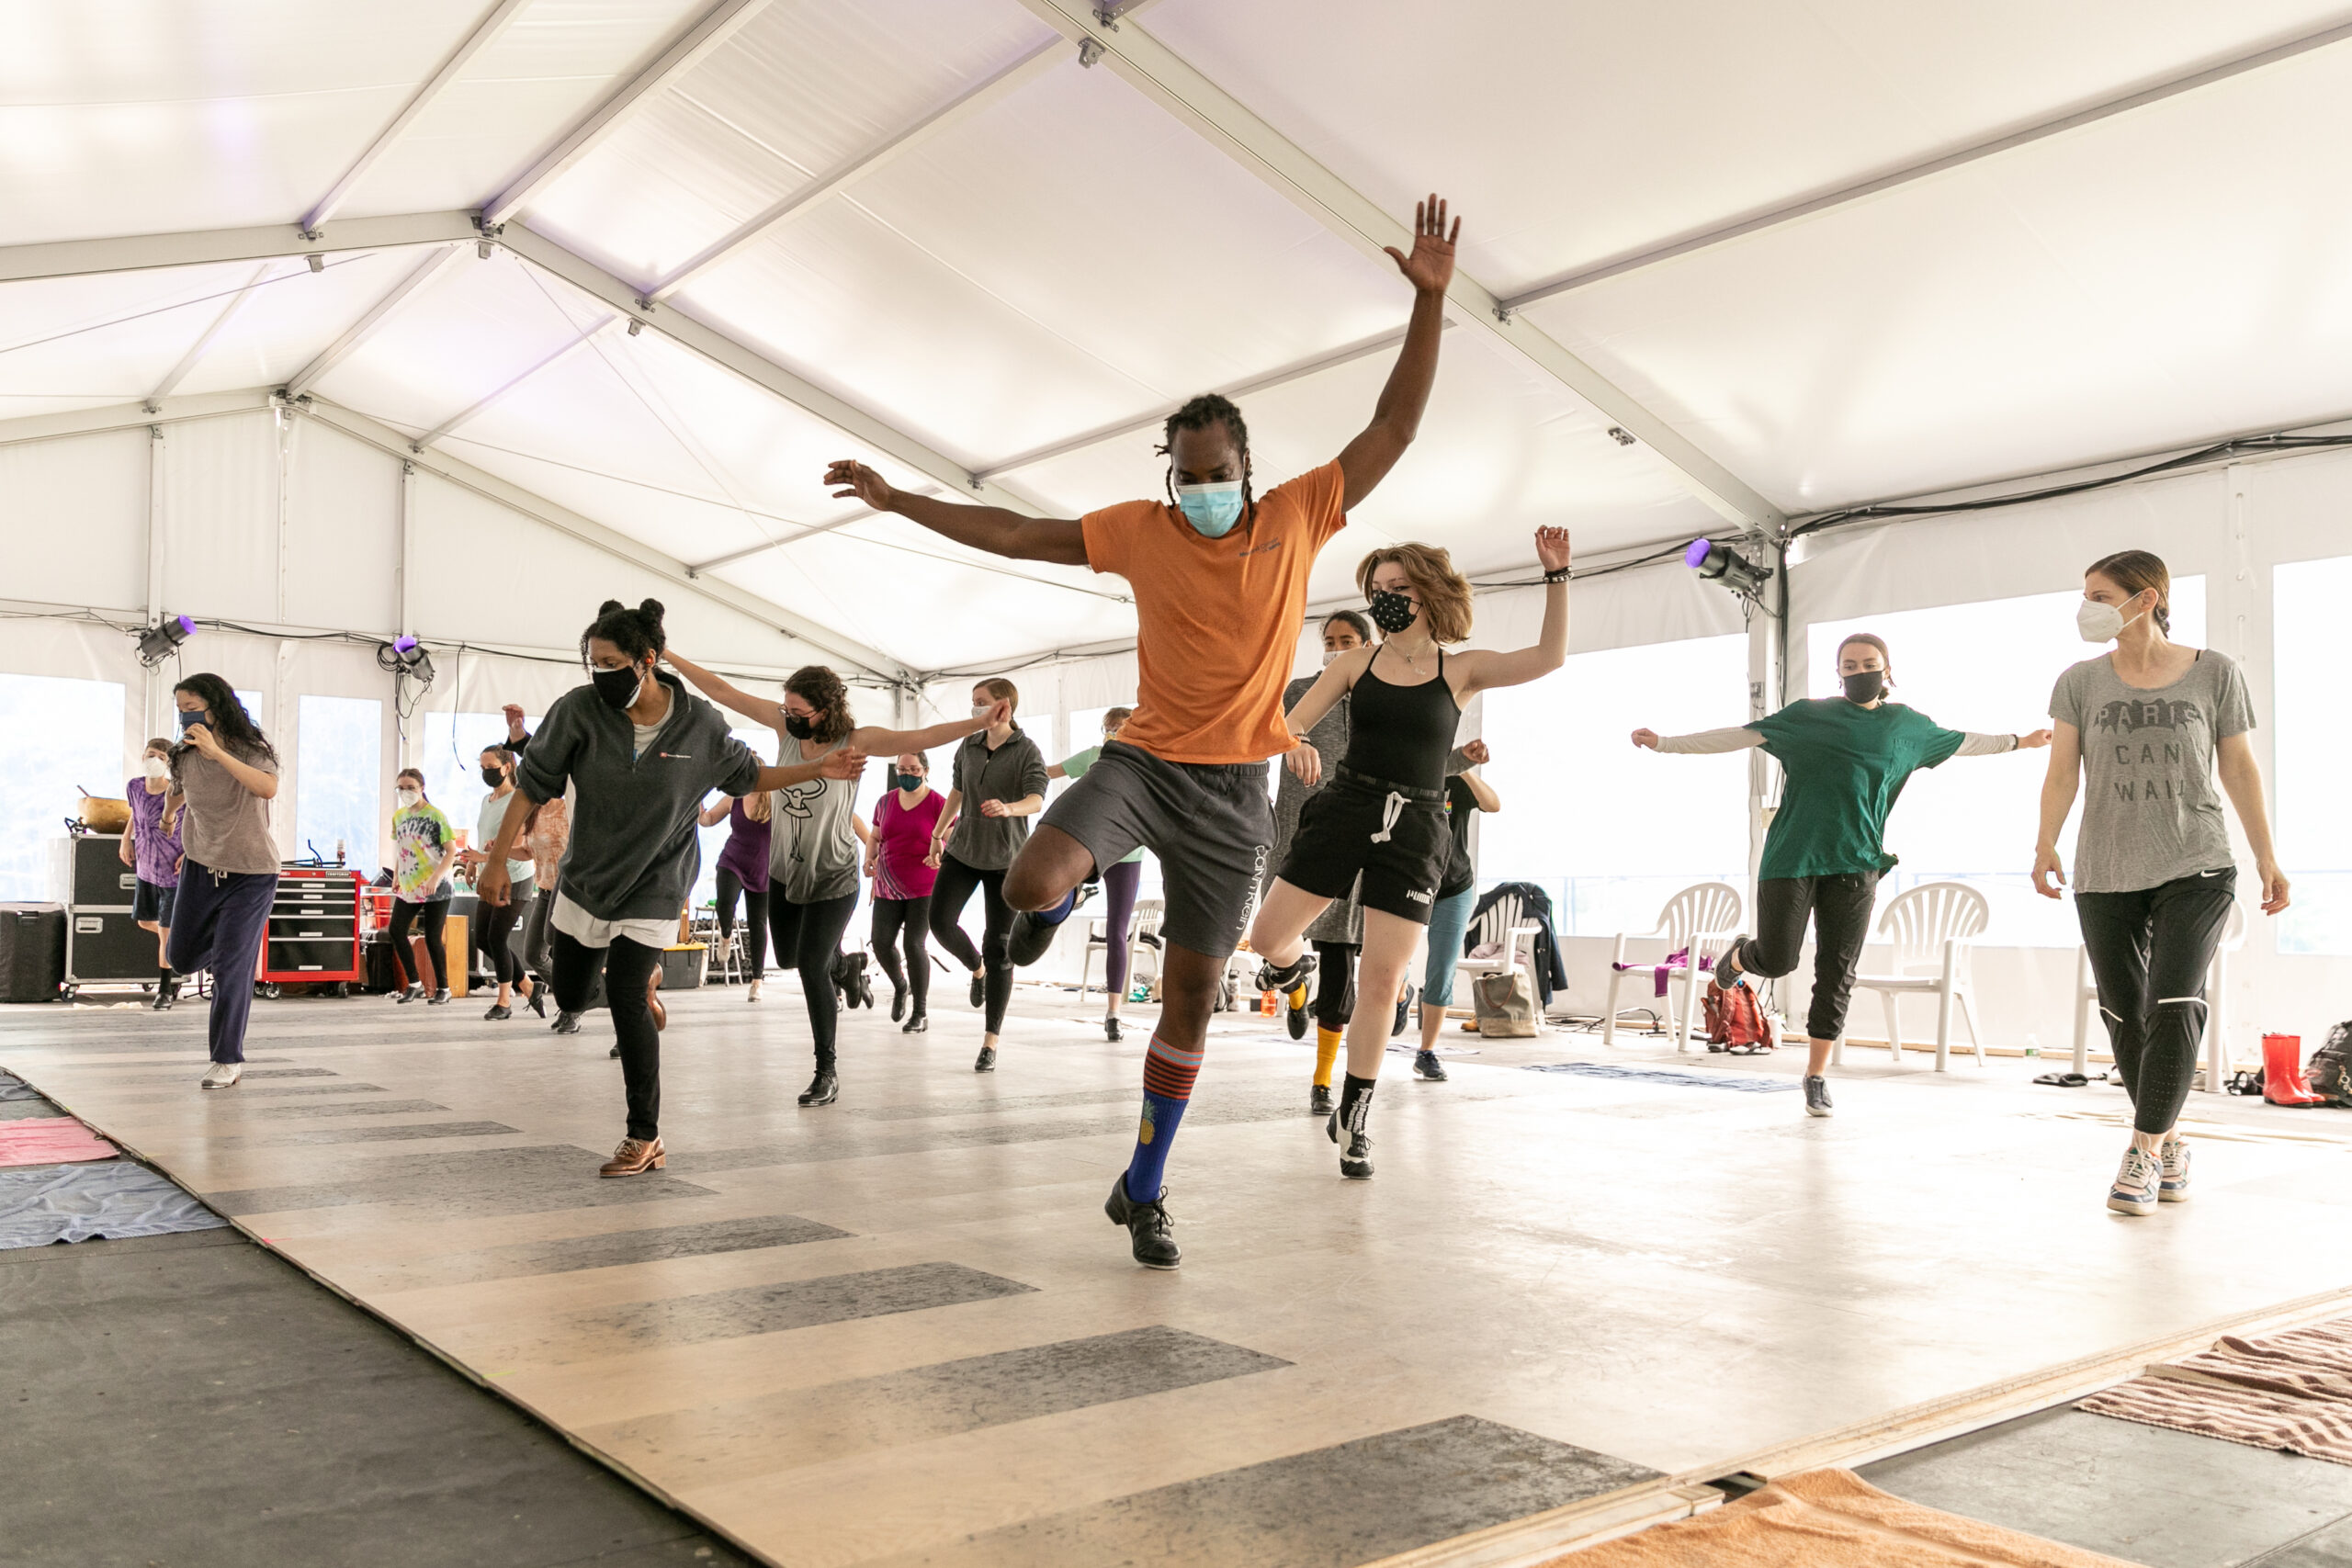 A group of tap dancers take class in an outdoor tent. They all are kicking their right foot and raise their arms in various shapes.